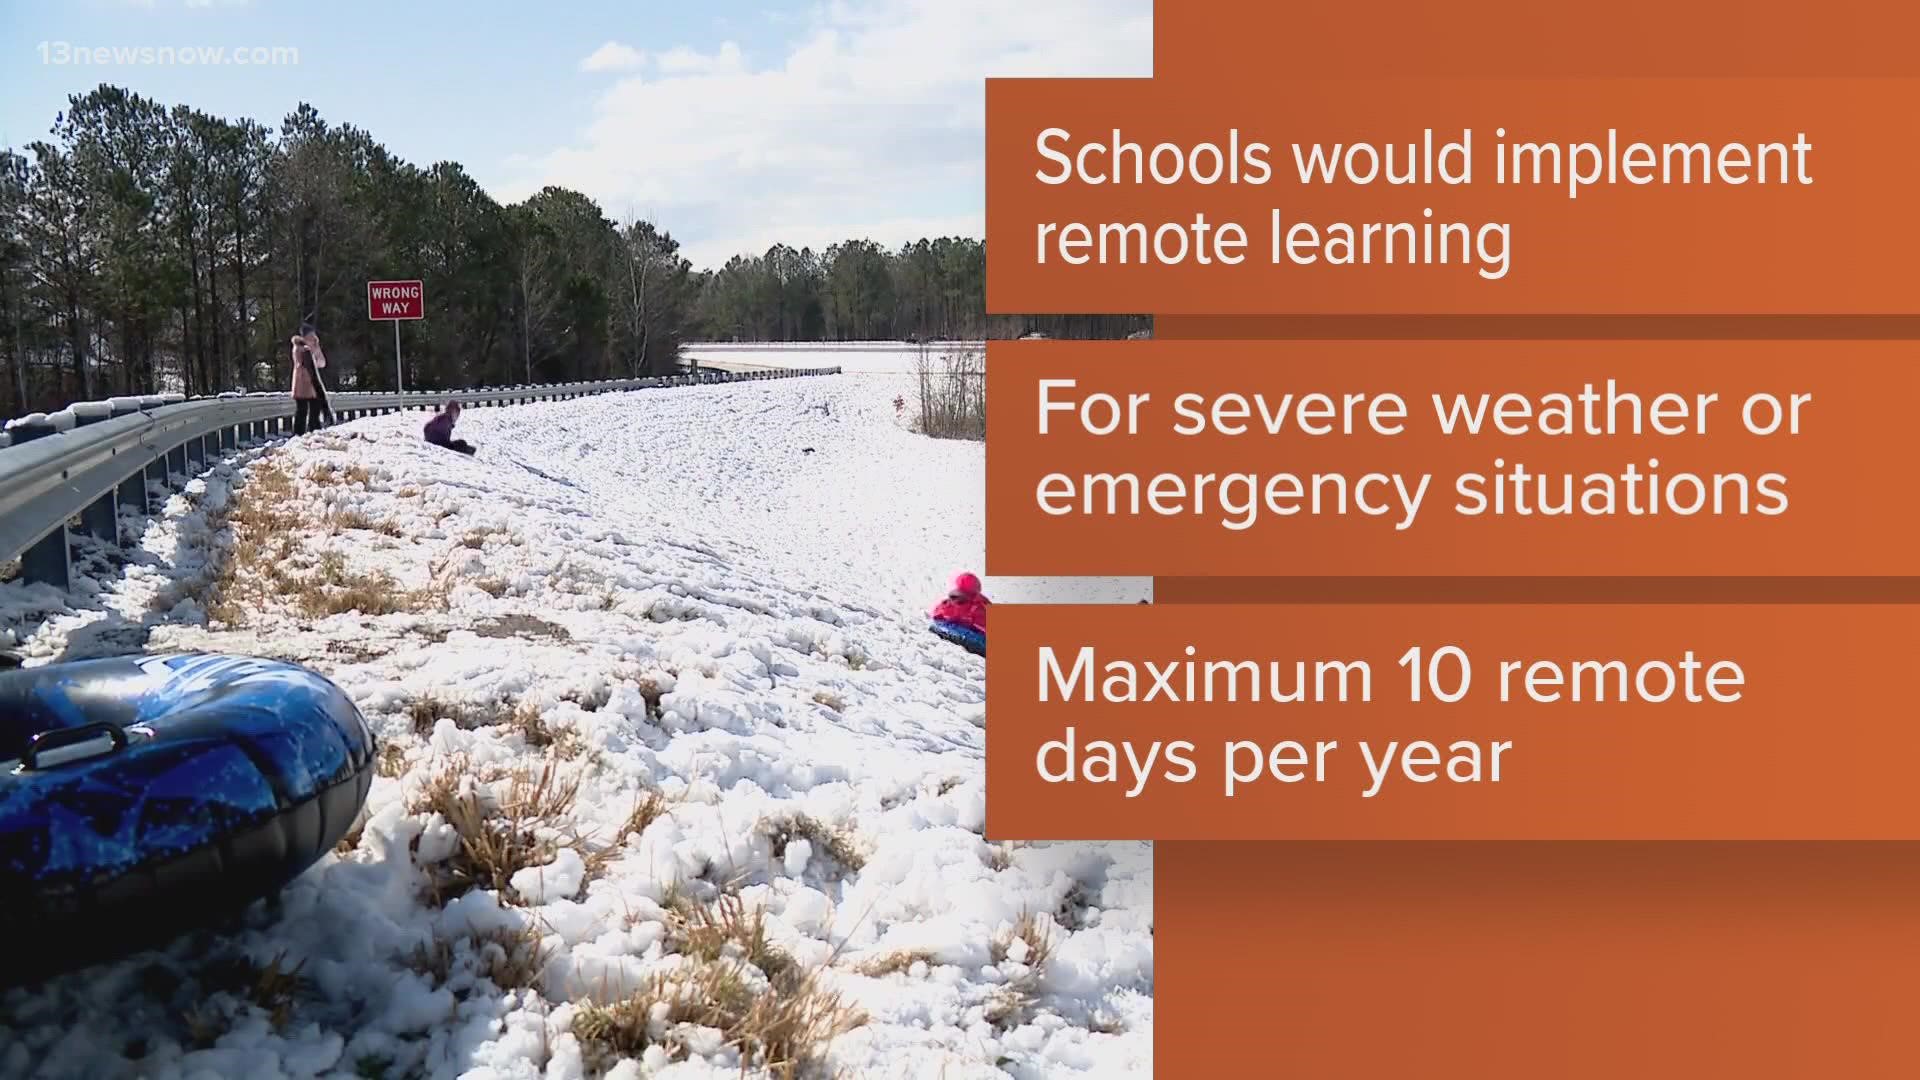 If passed, this bill would require remote learning on days with inclement weather.